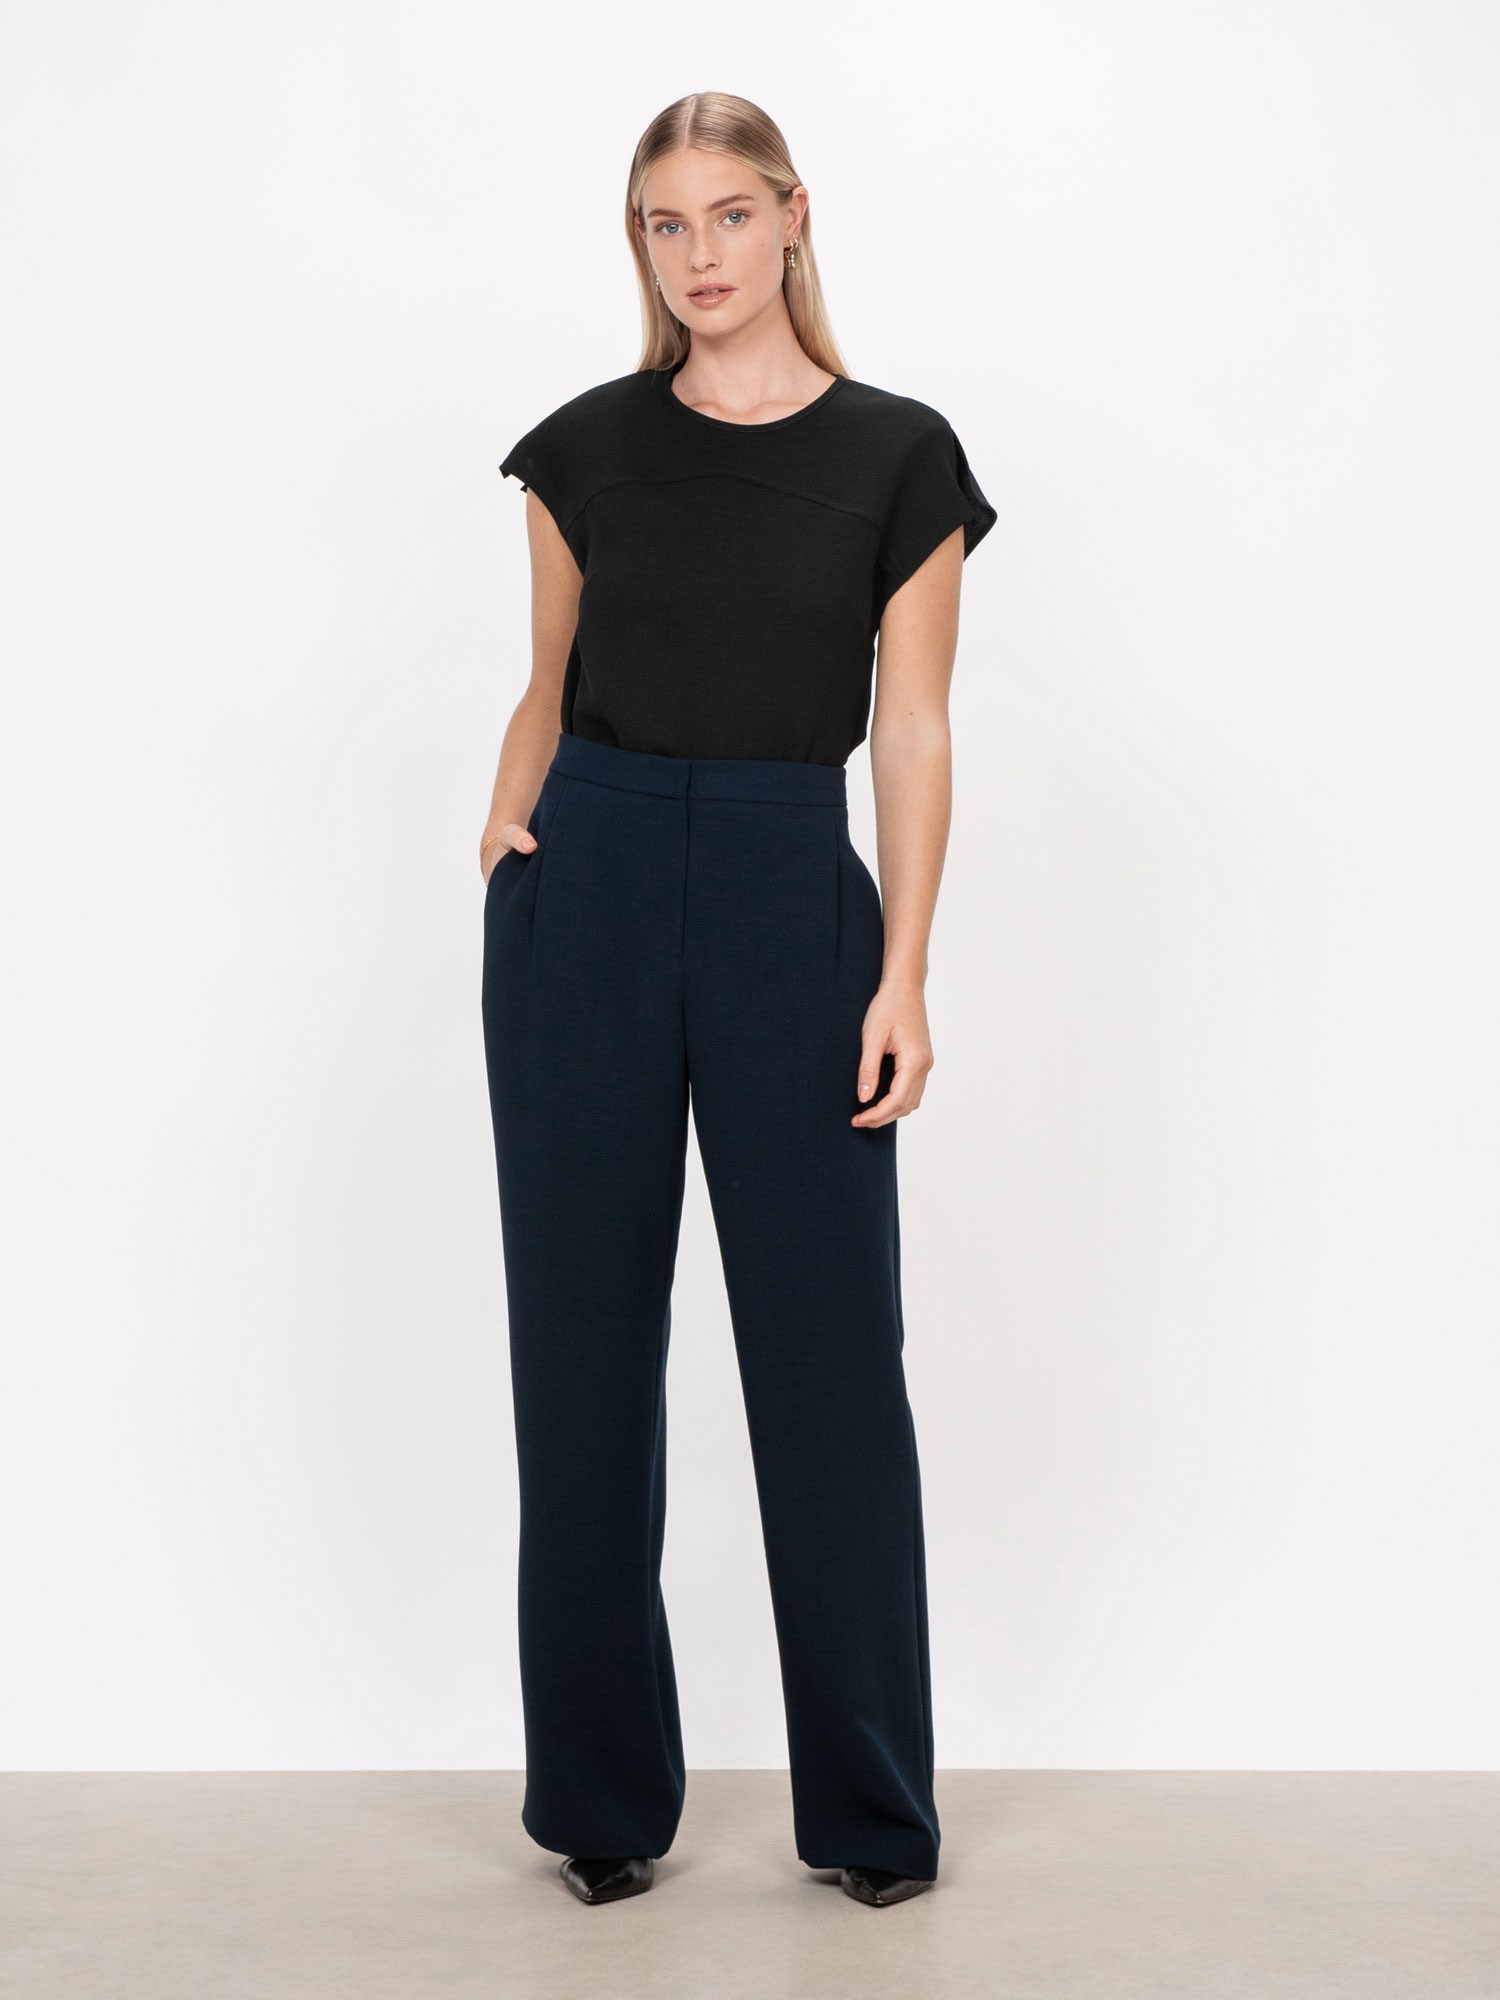 Double Weave Relaxed Pant | Buy Pants Online - Veronika Maine